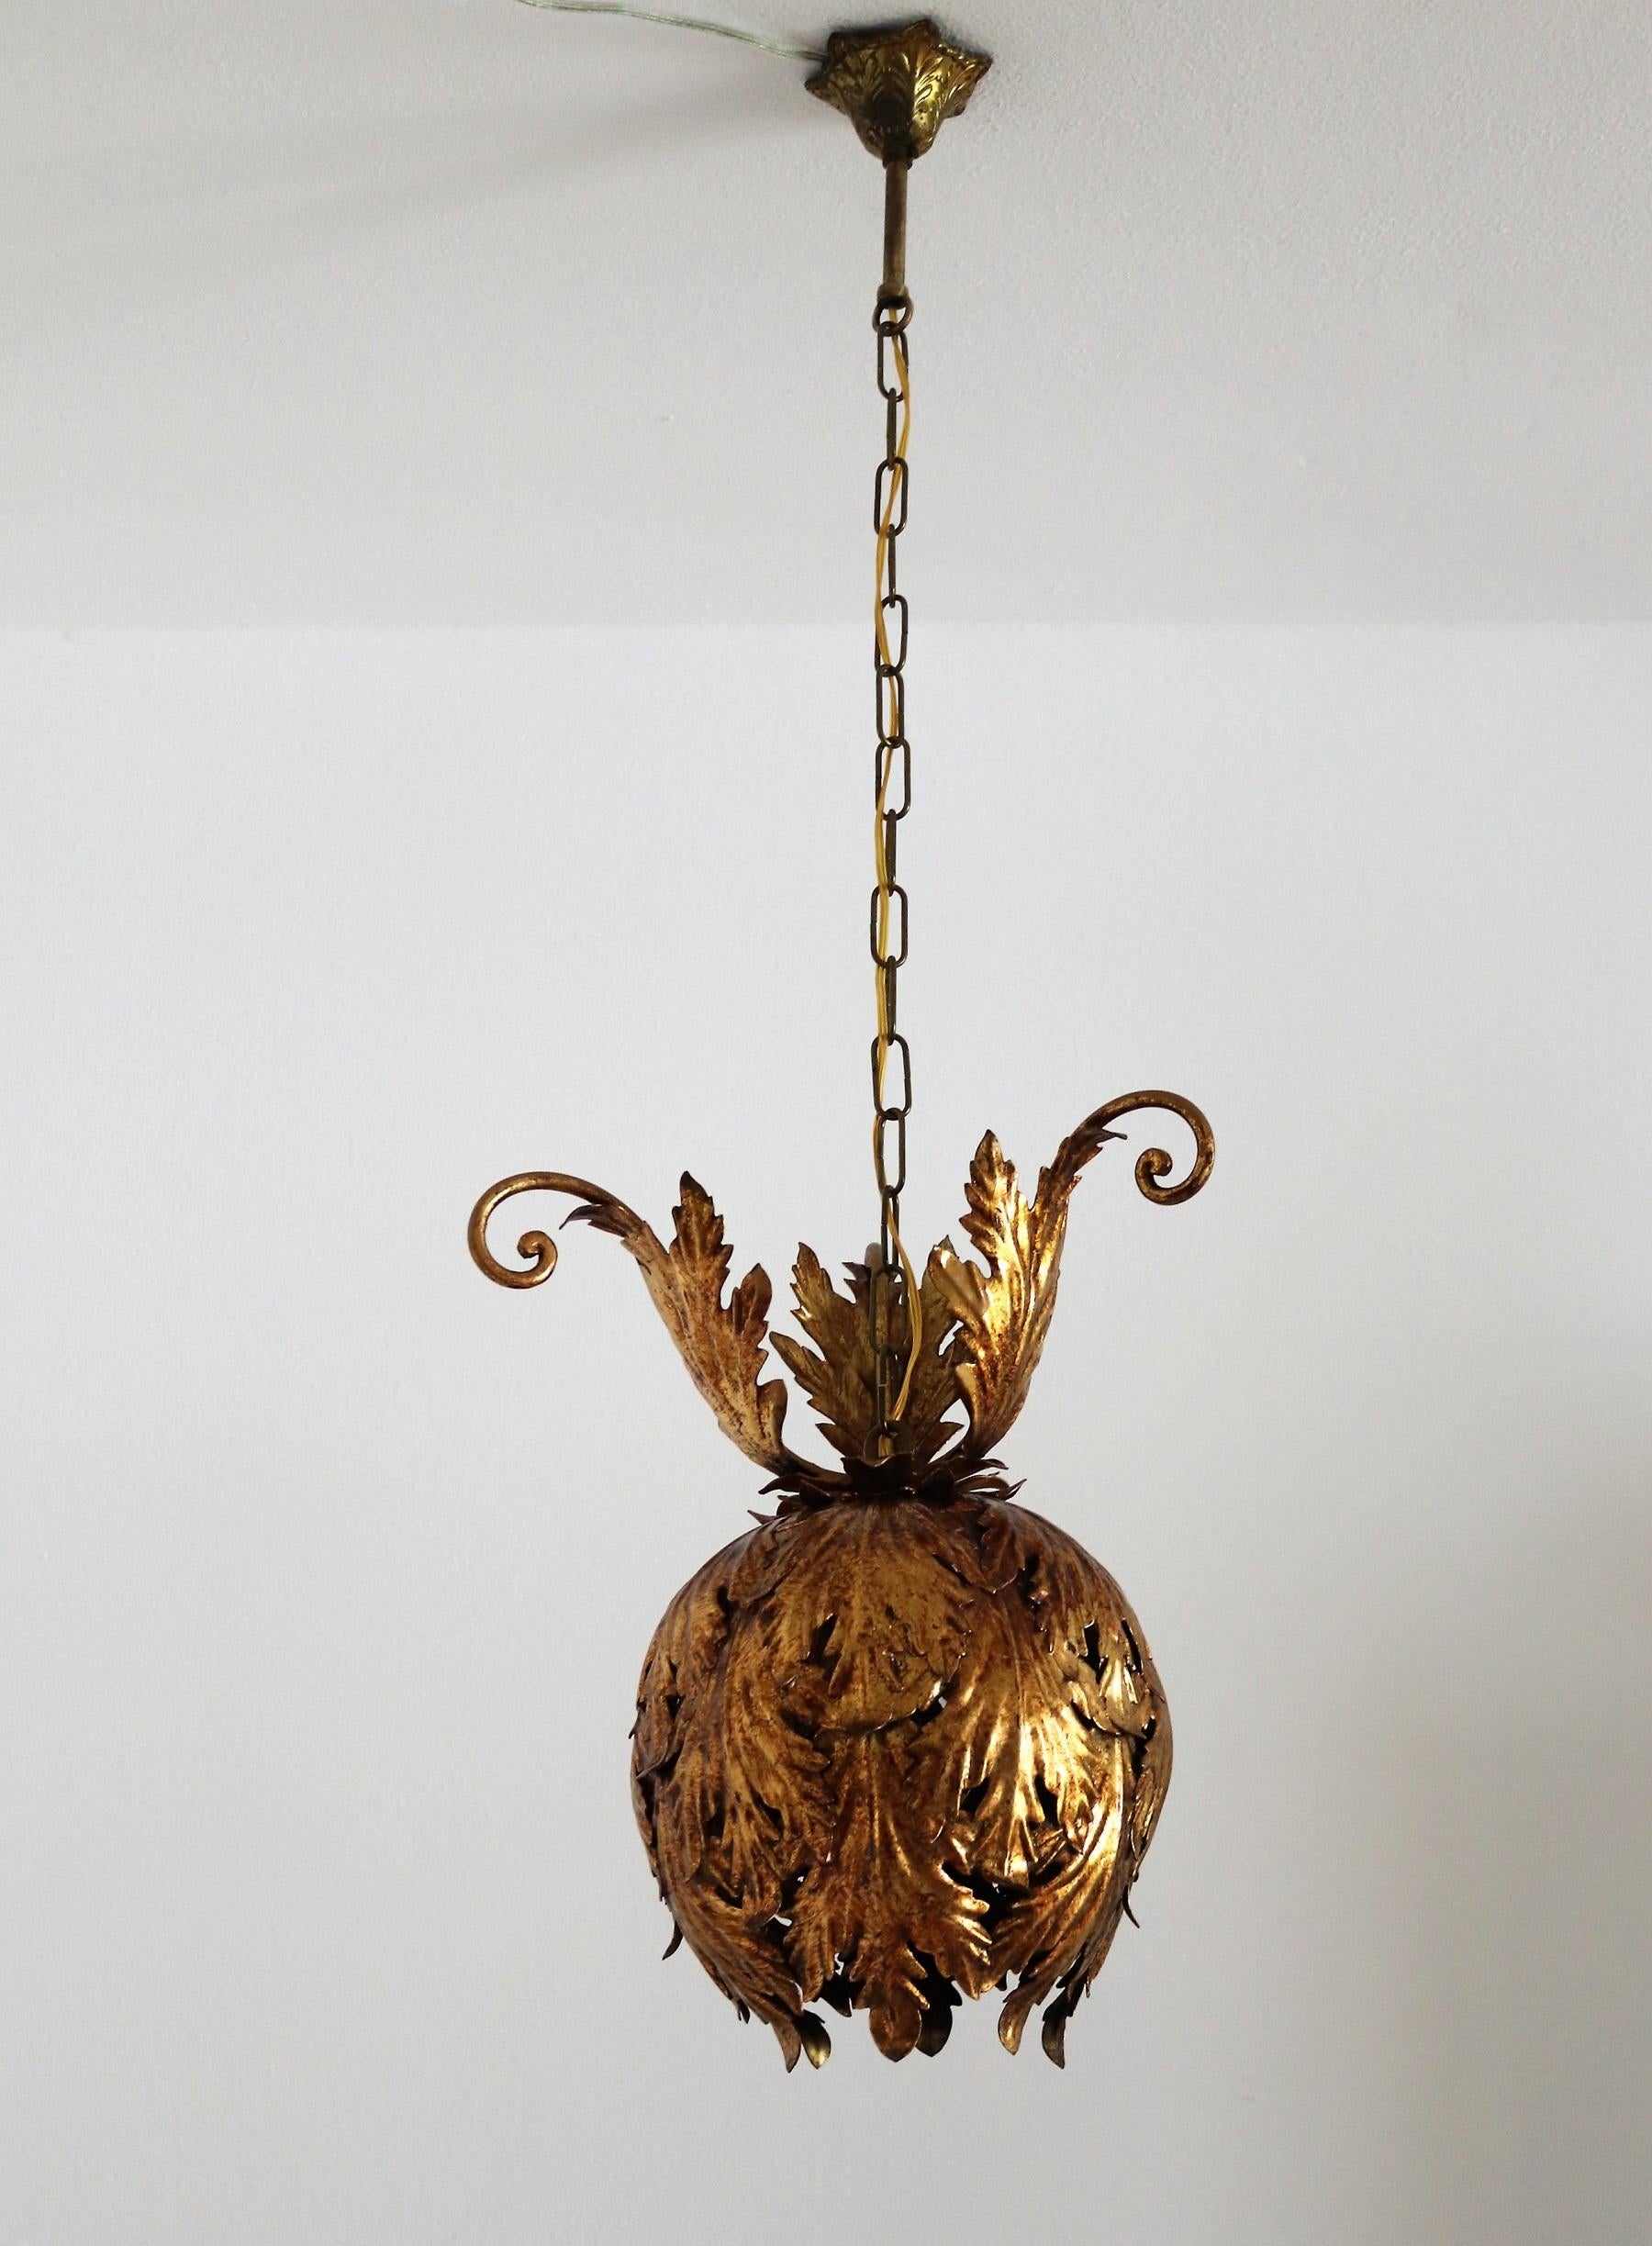 Italian Midcentury Gilt Metal Pendant Lamp with Leaves for Hans Kögl, 1960s For Sale 8